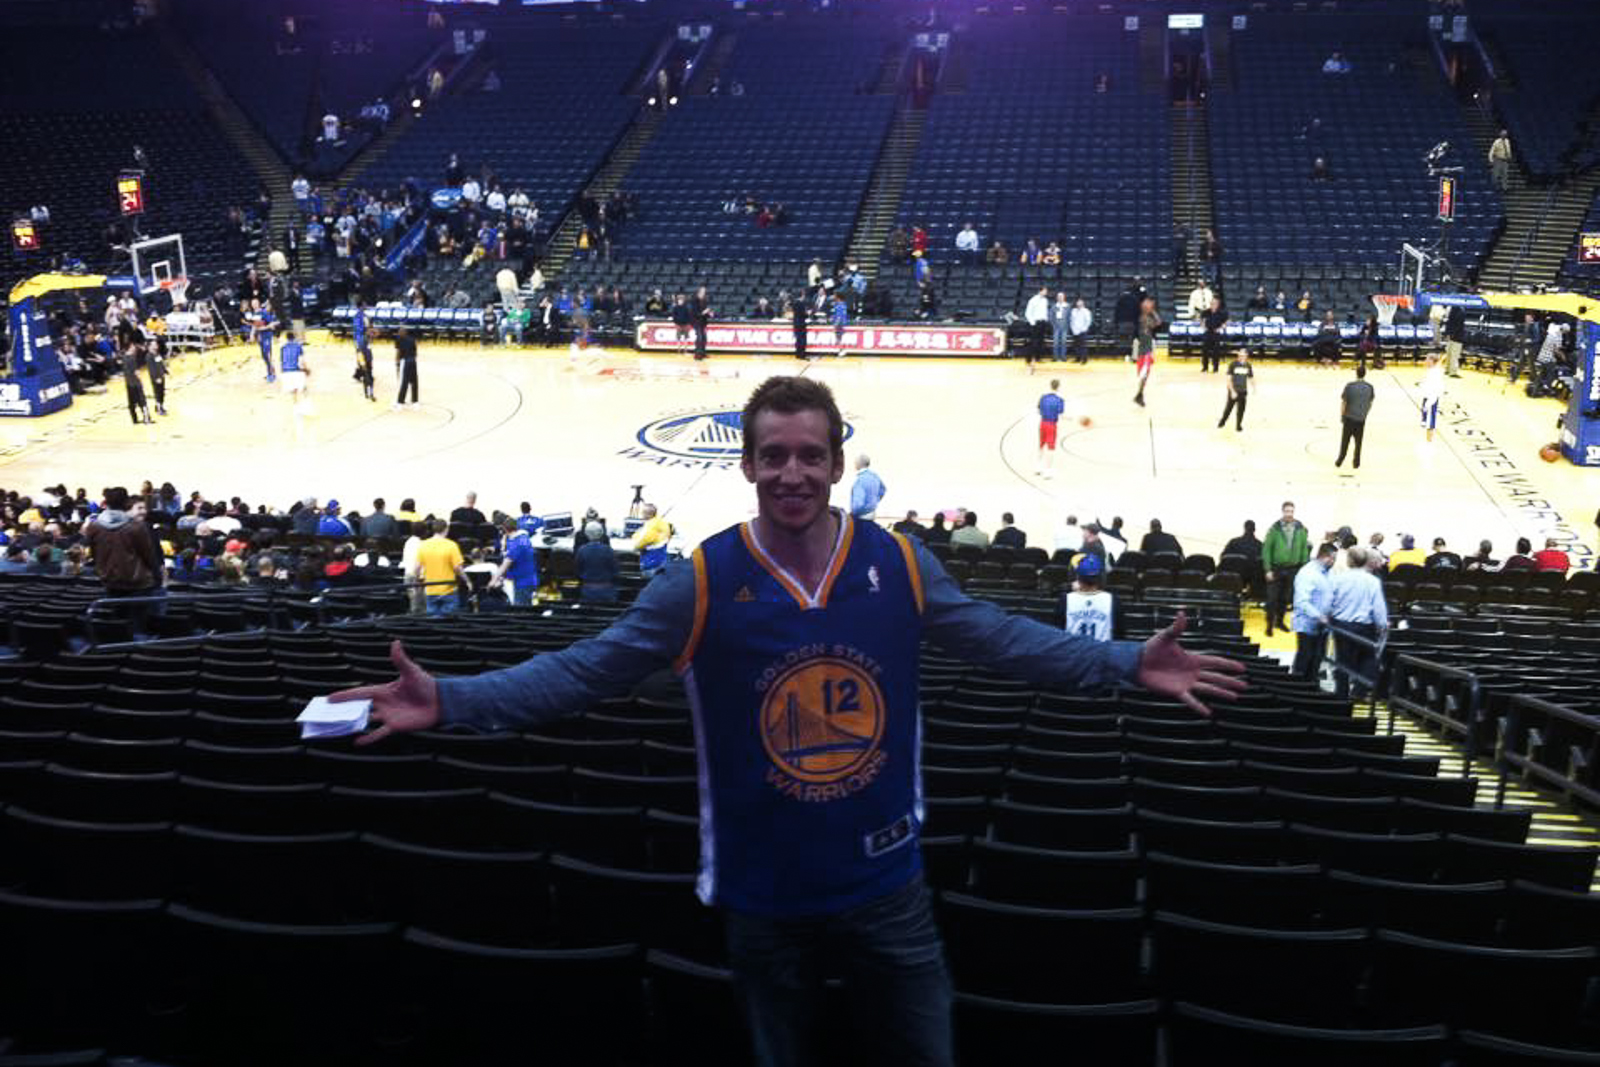 Golden State Warriors game